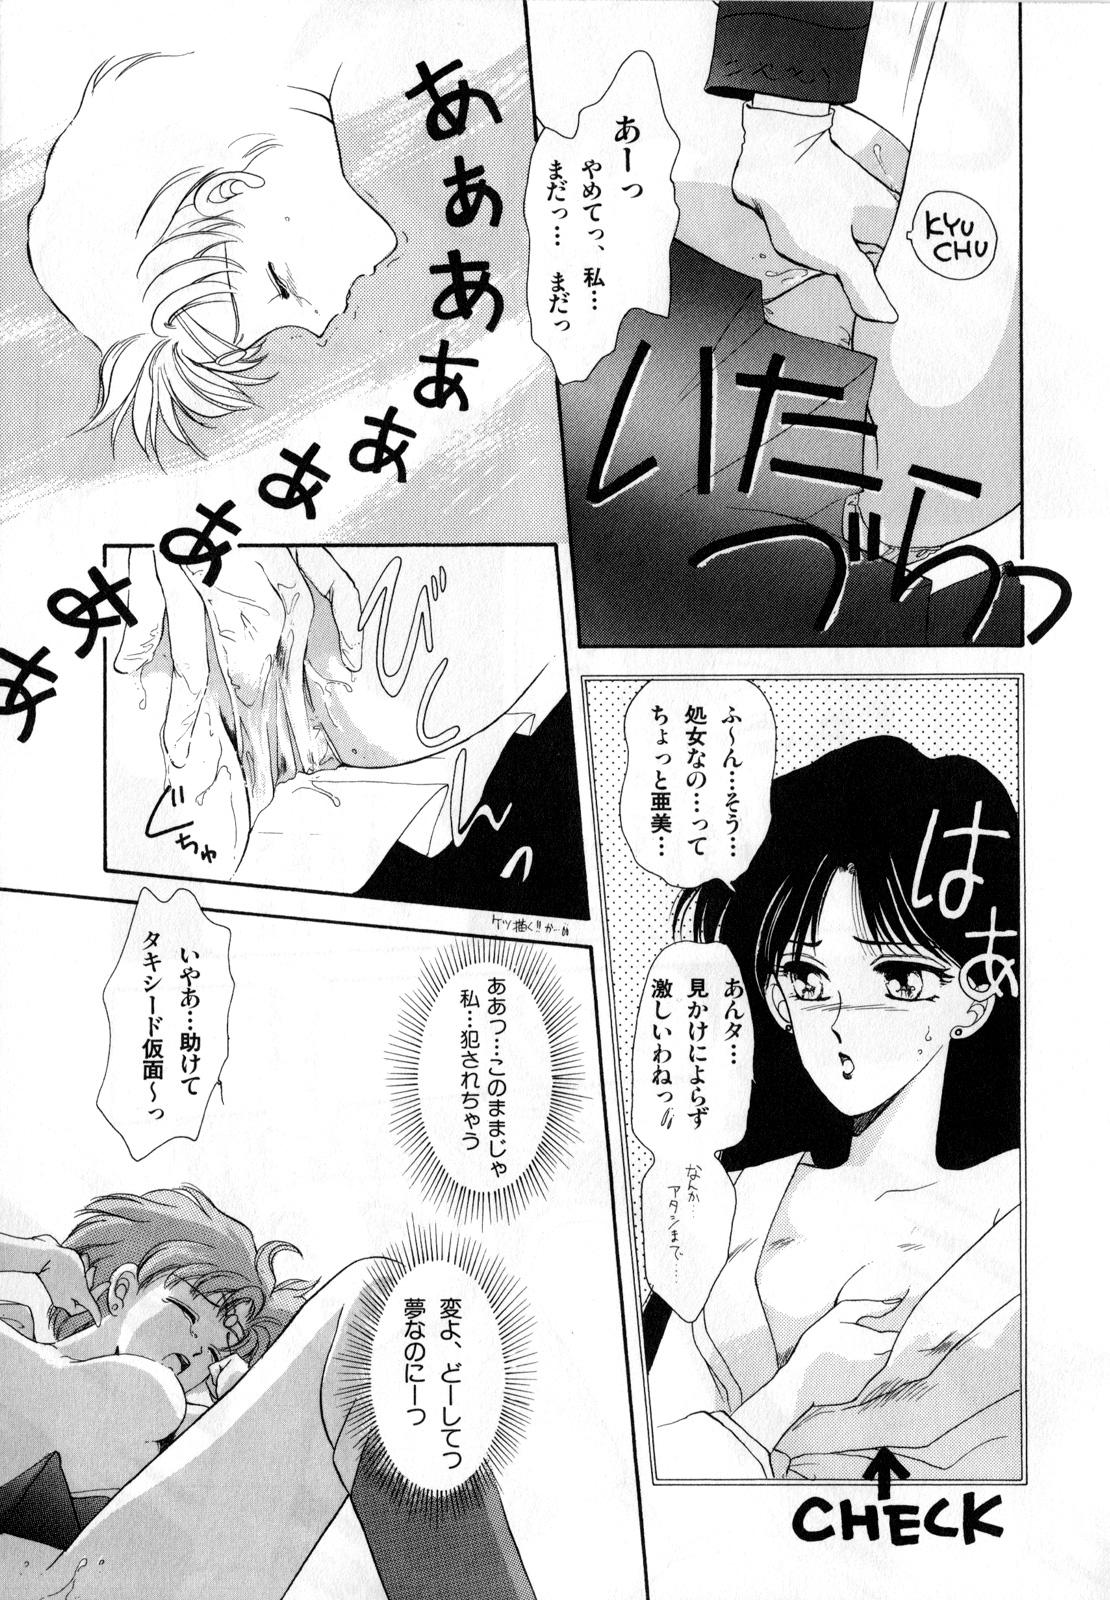 Submissive Lunatic Party 1 - Sailor moon Gaybukkake - Page 12